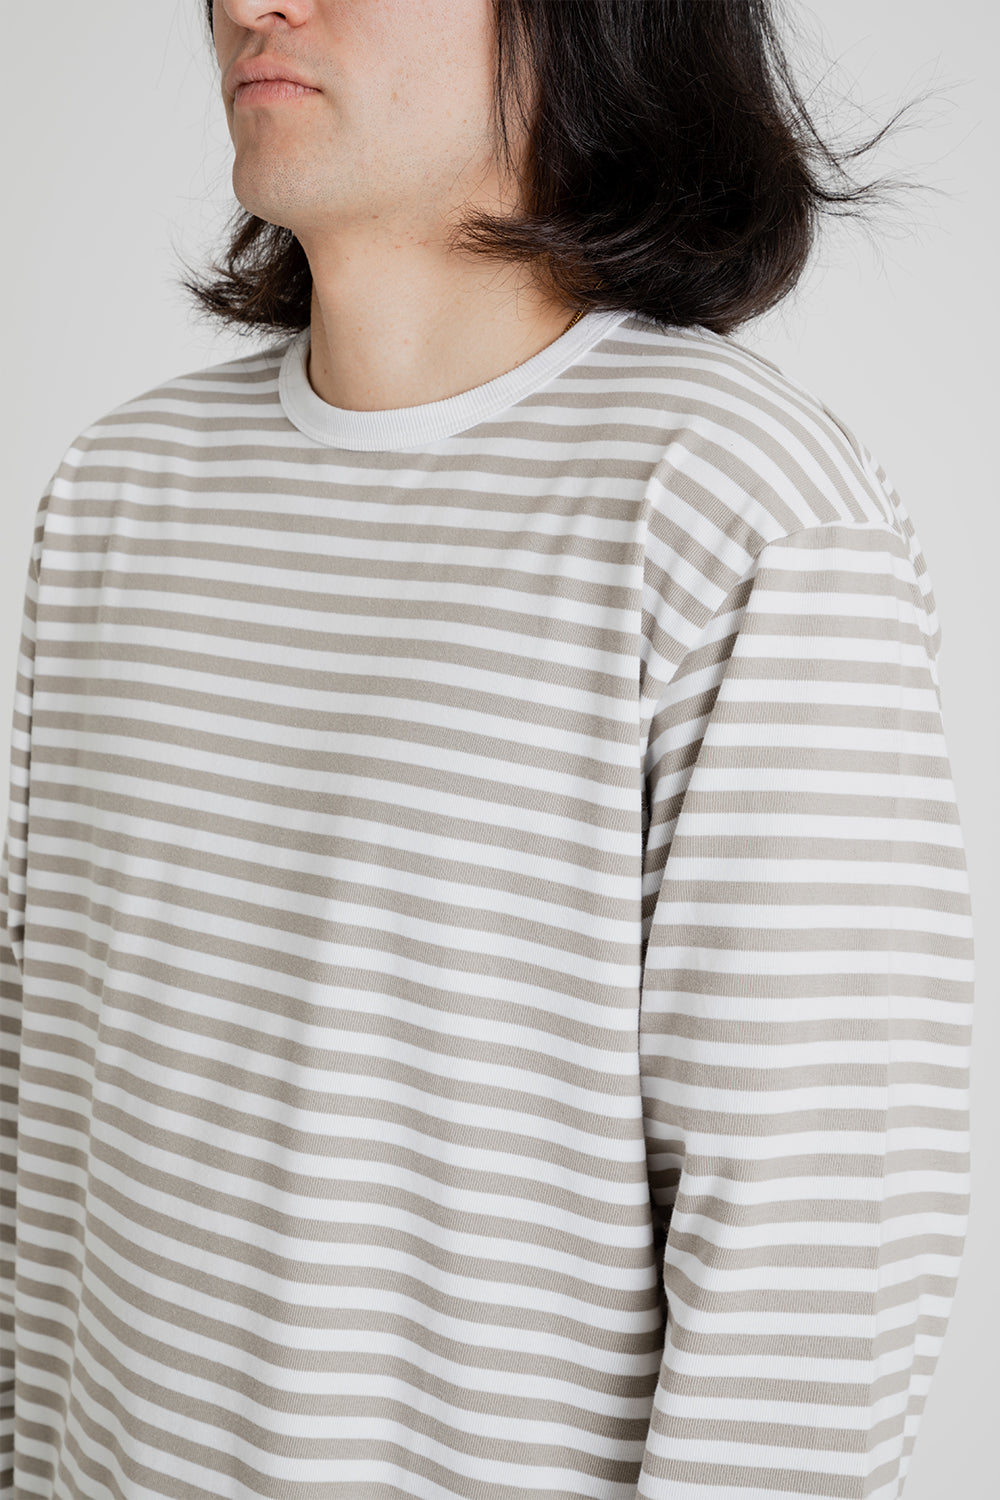 Nanamica Coolmax St Jersey L/S Tee in Taupe x White | Wallace